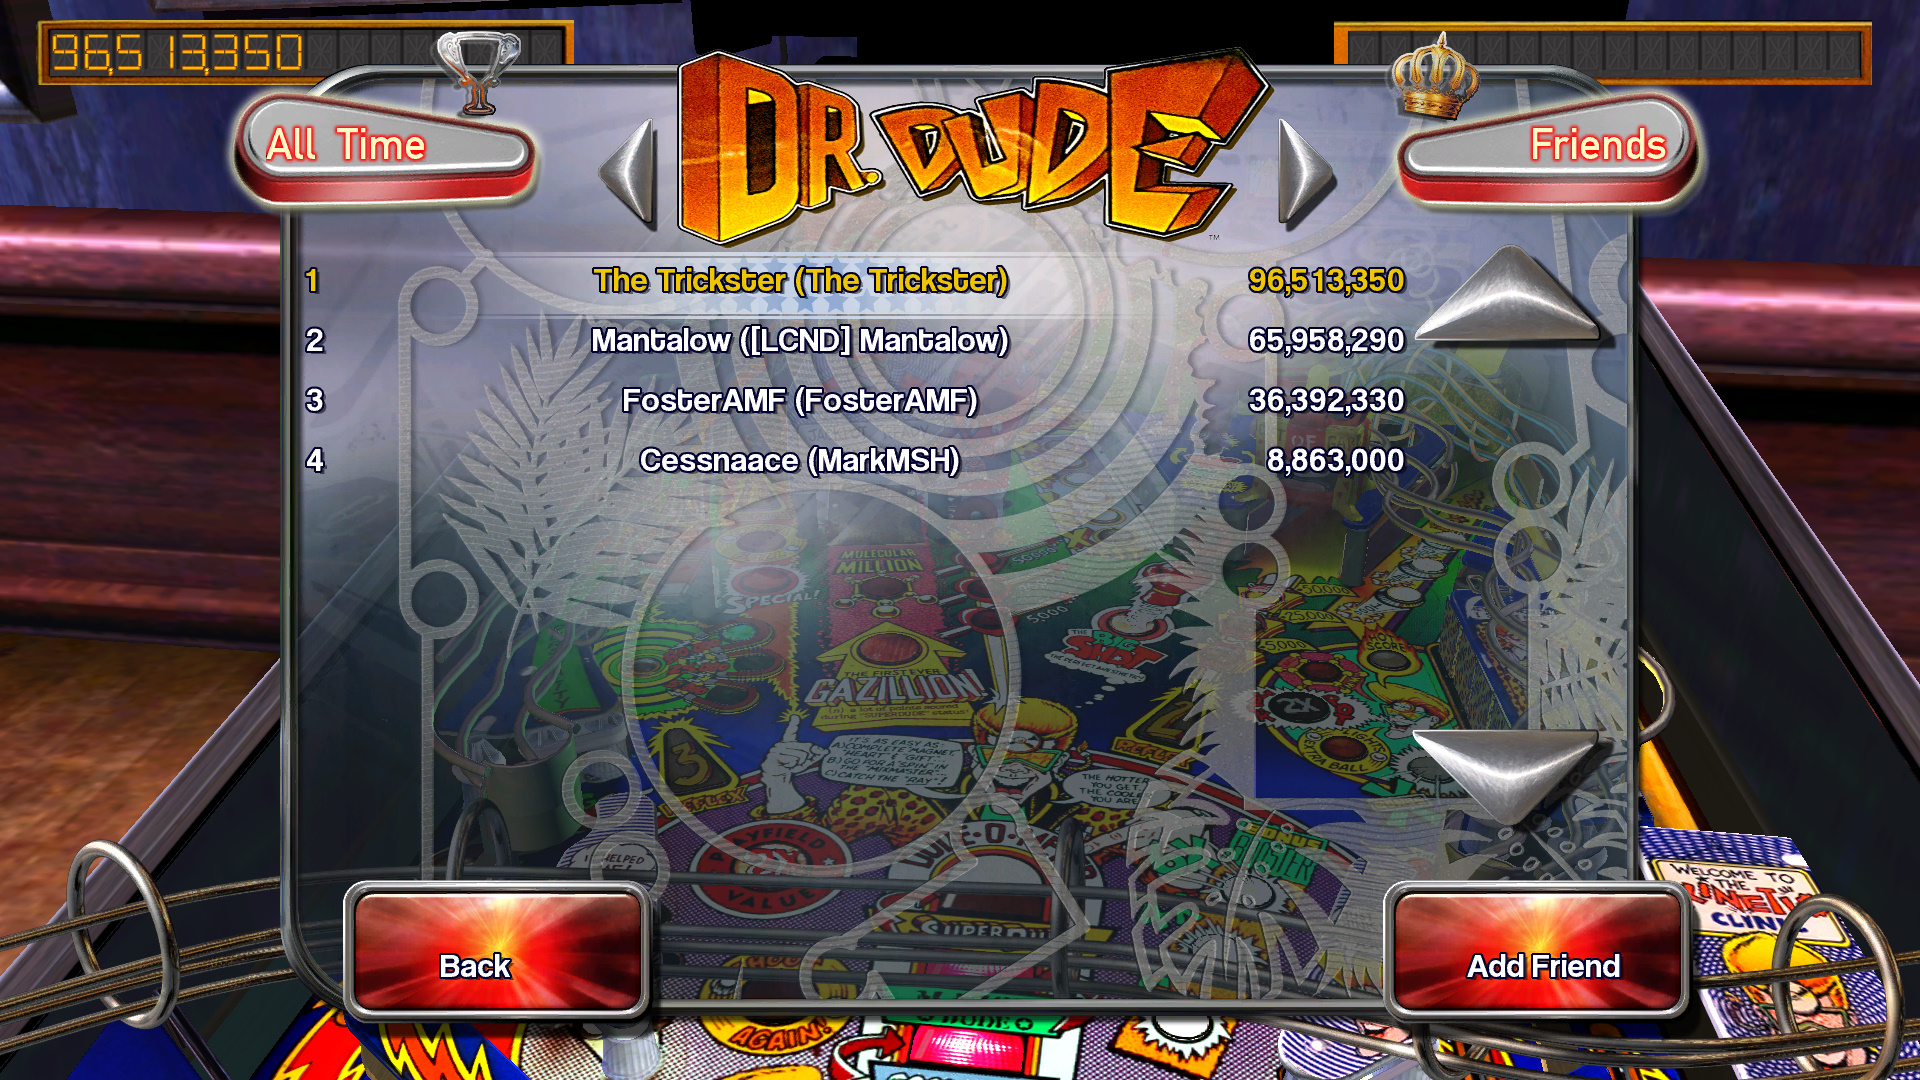 TheTrickster: Pinball Arcade: Dr. Dude (PC) 96,513,350 points on 2015-10-10 03:10:07